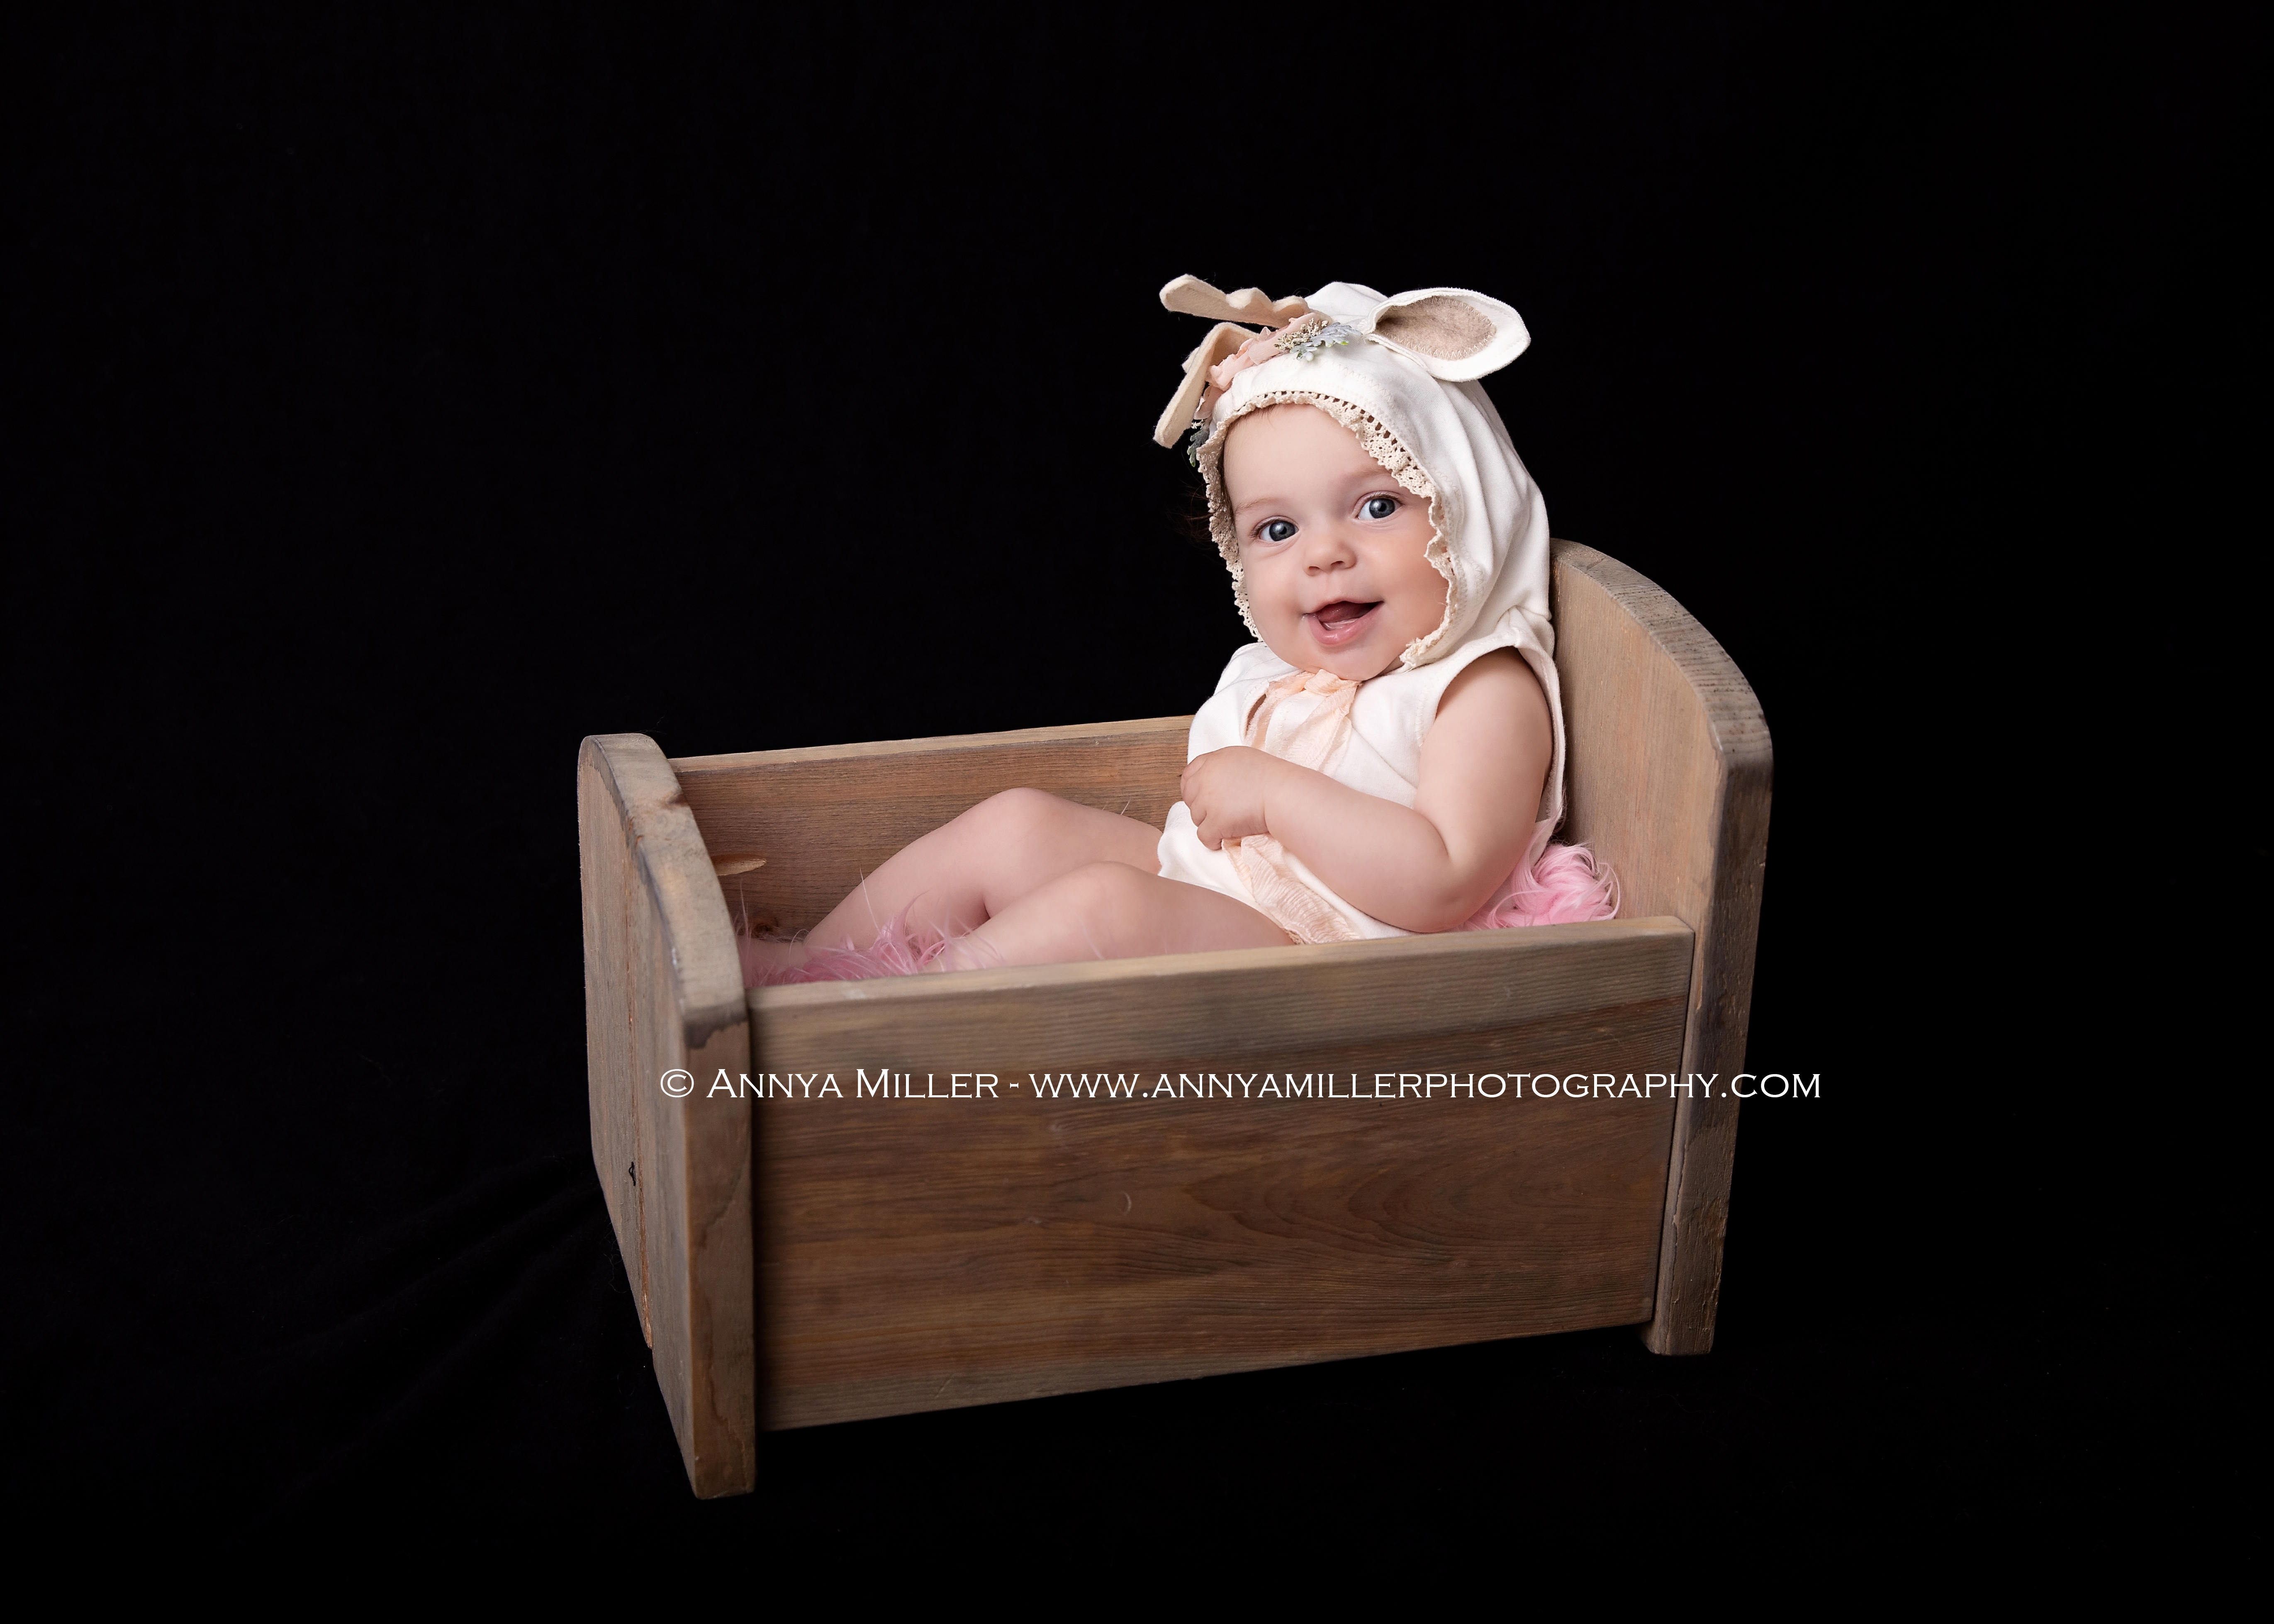 Portraits of baby girl in pearls and tutu by Durham baby photographer Annya Miller of Pickering